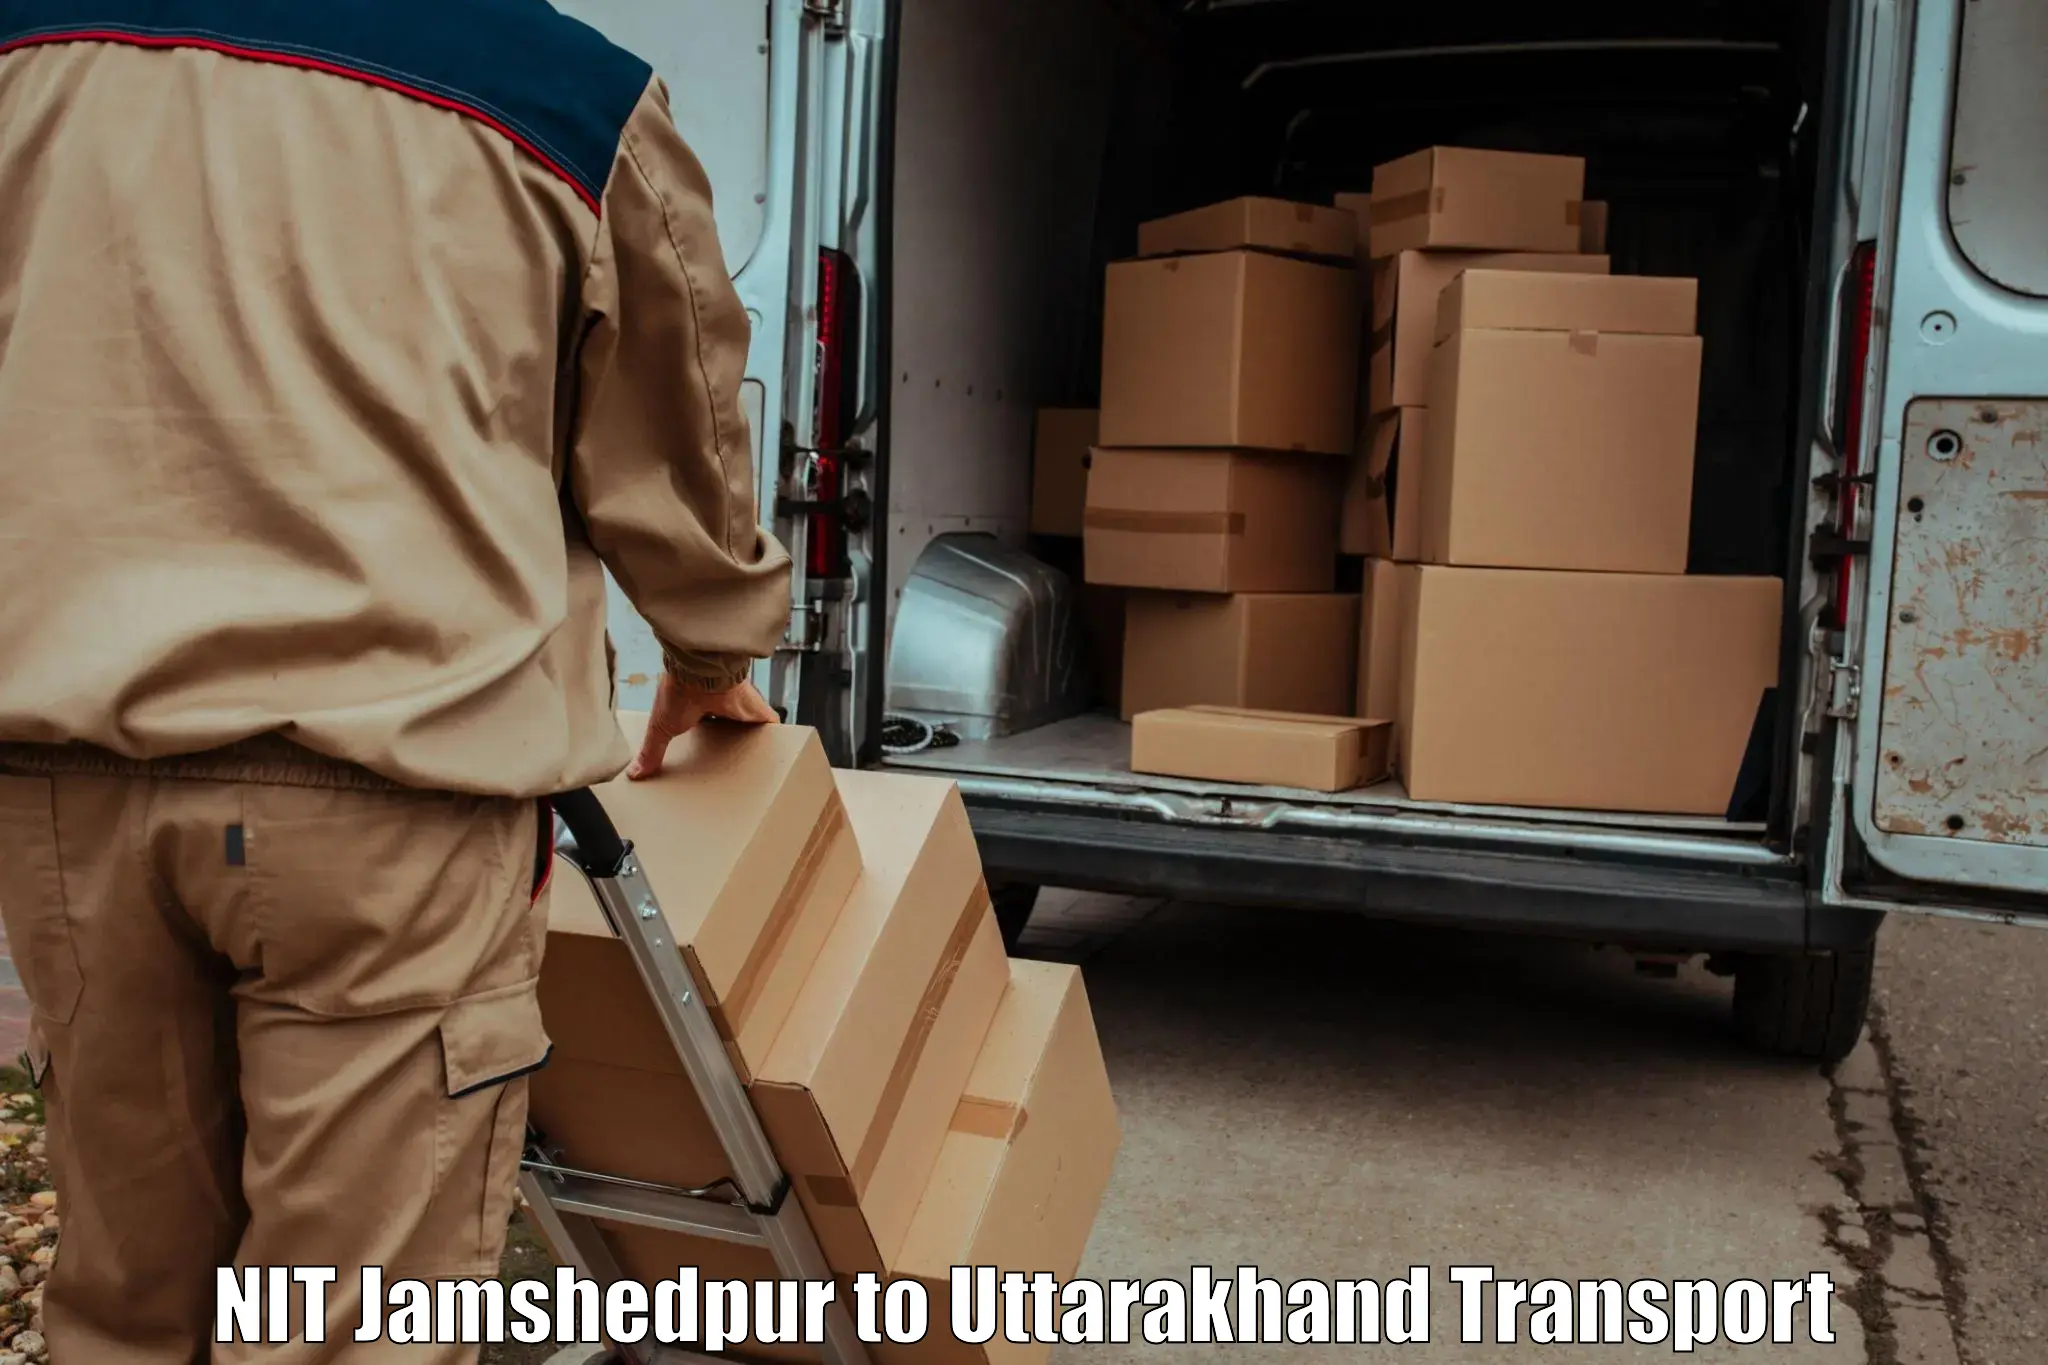 Cargo transport services NIT Jamshedpur to Mussoorie